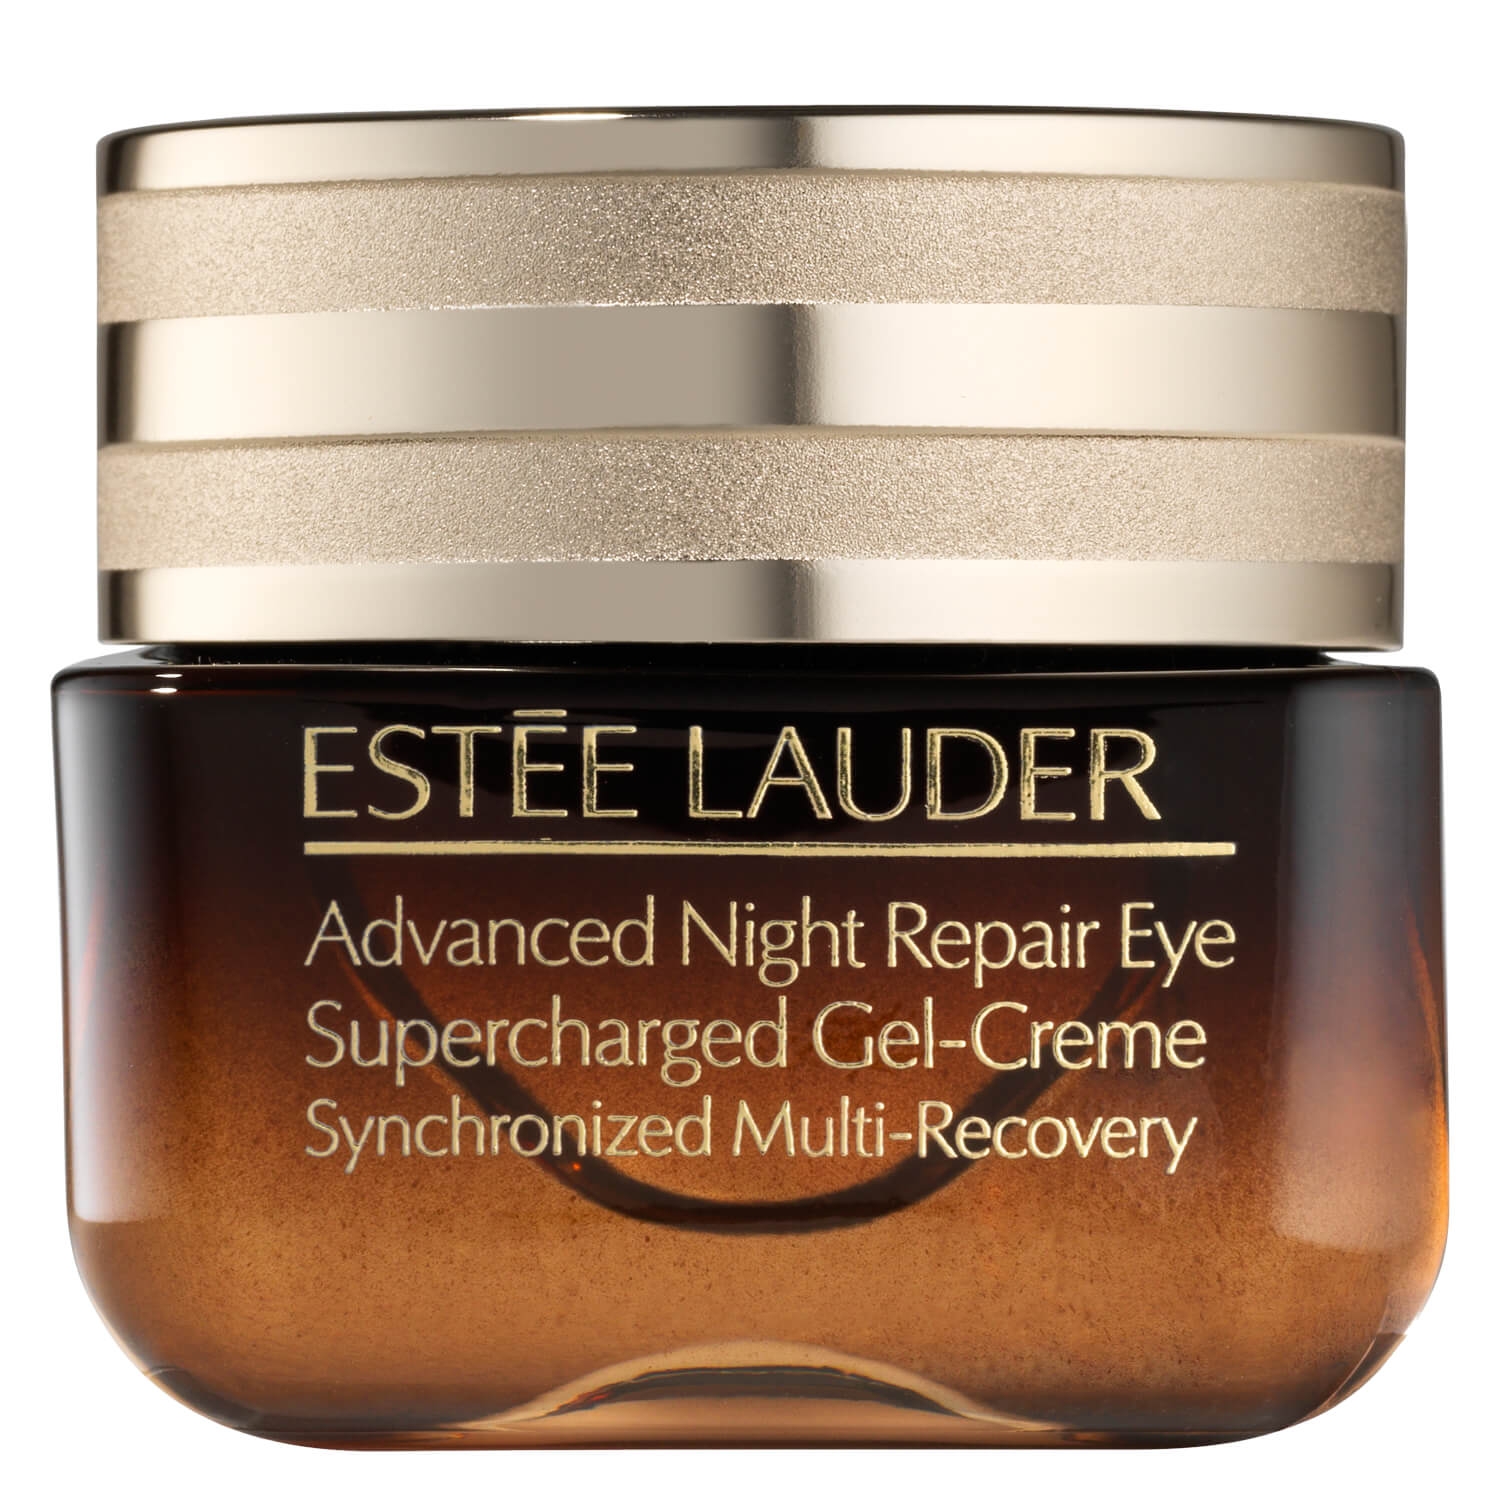 Product image from Advanced Night Repair Eye Supercharged Gel-Creme